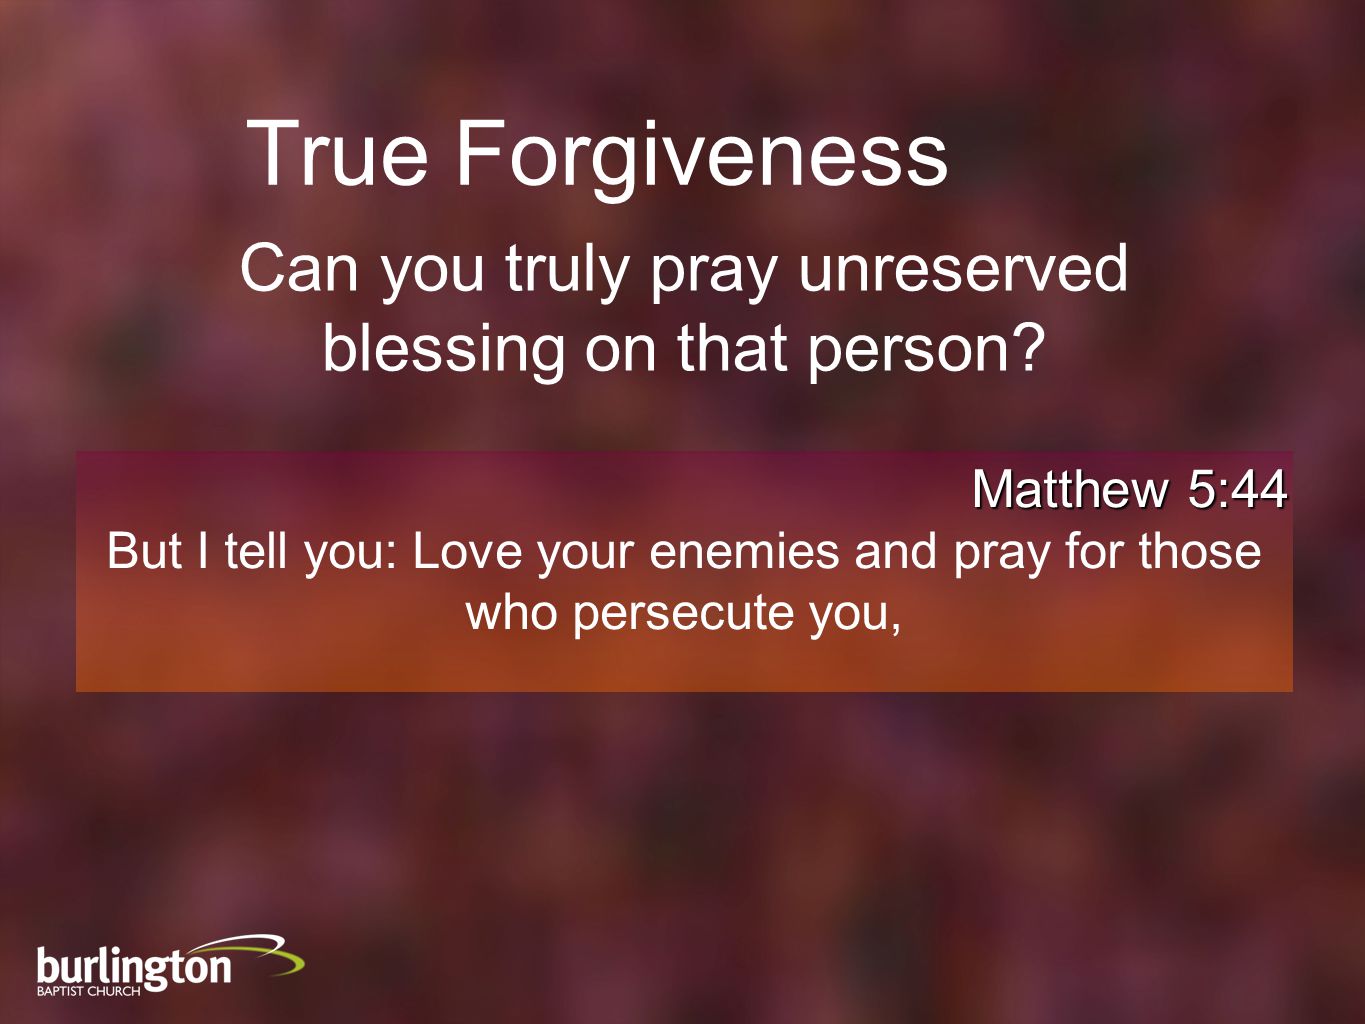 Matthew 5:44 But I tell you: Love your enemies and pray for those who persecute you, True Forgiveness Can you truly pray unreserved blessing on that person